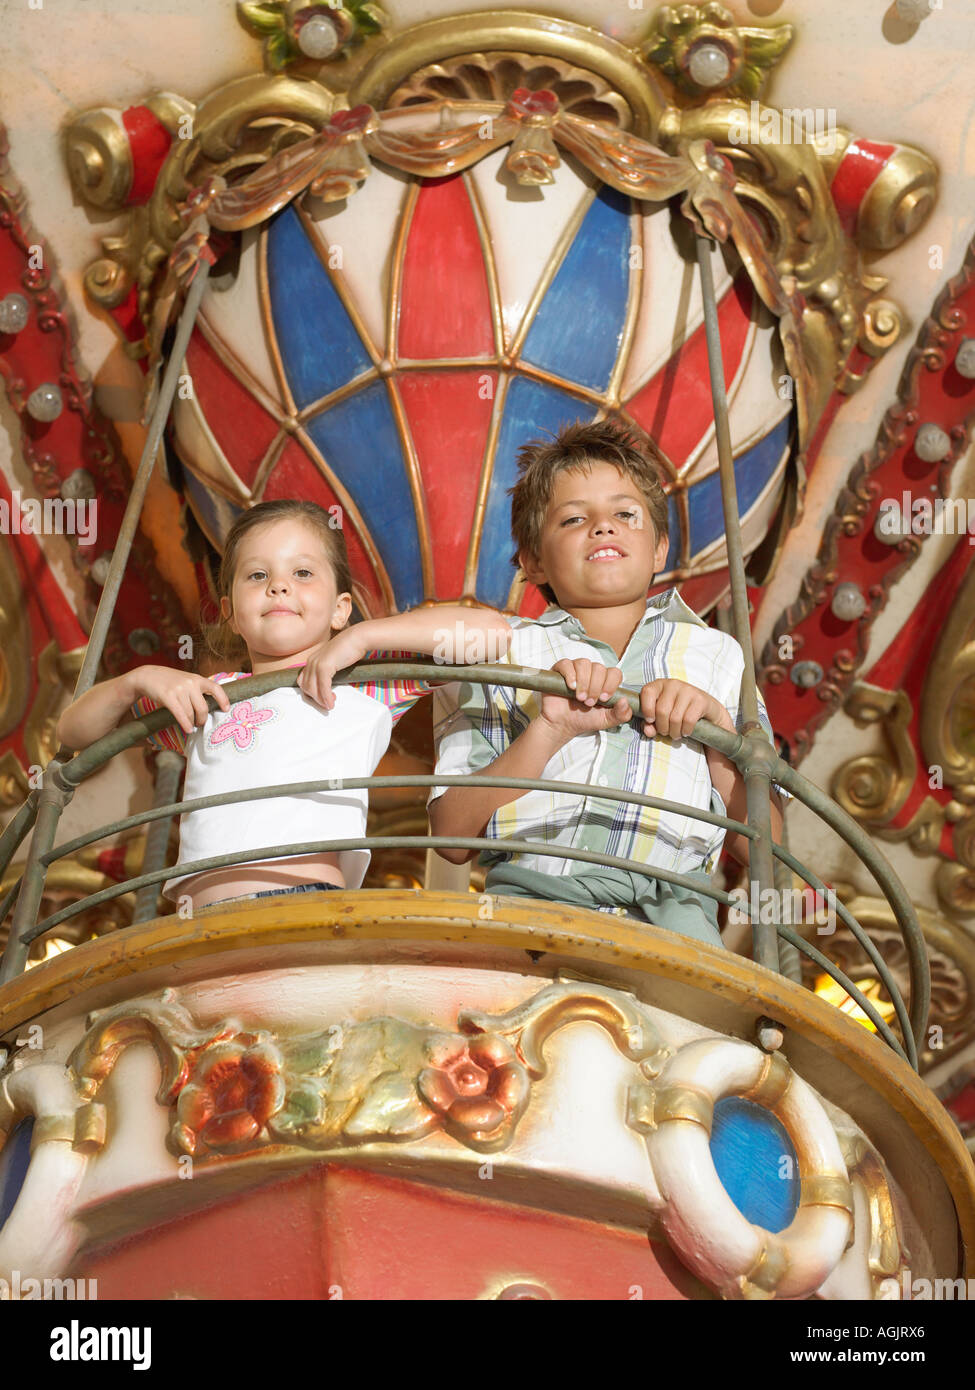 Brother and sister on a fairground ride Stock Photo